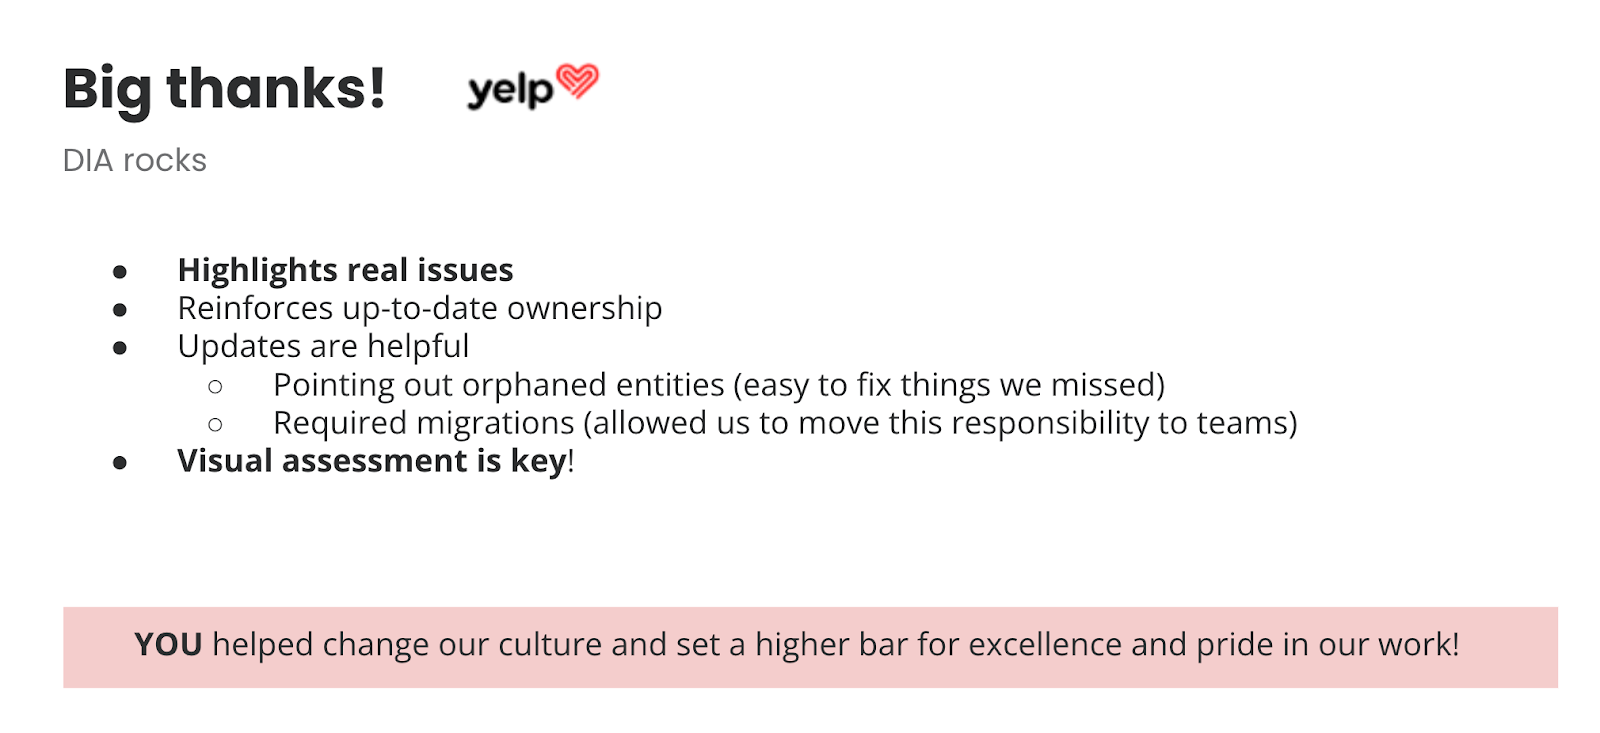 The team at Yelp provided a nice testimonial for our team